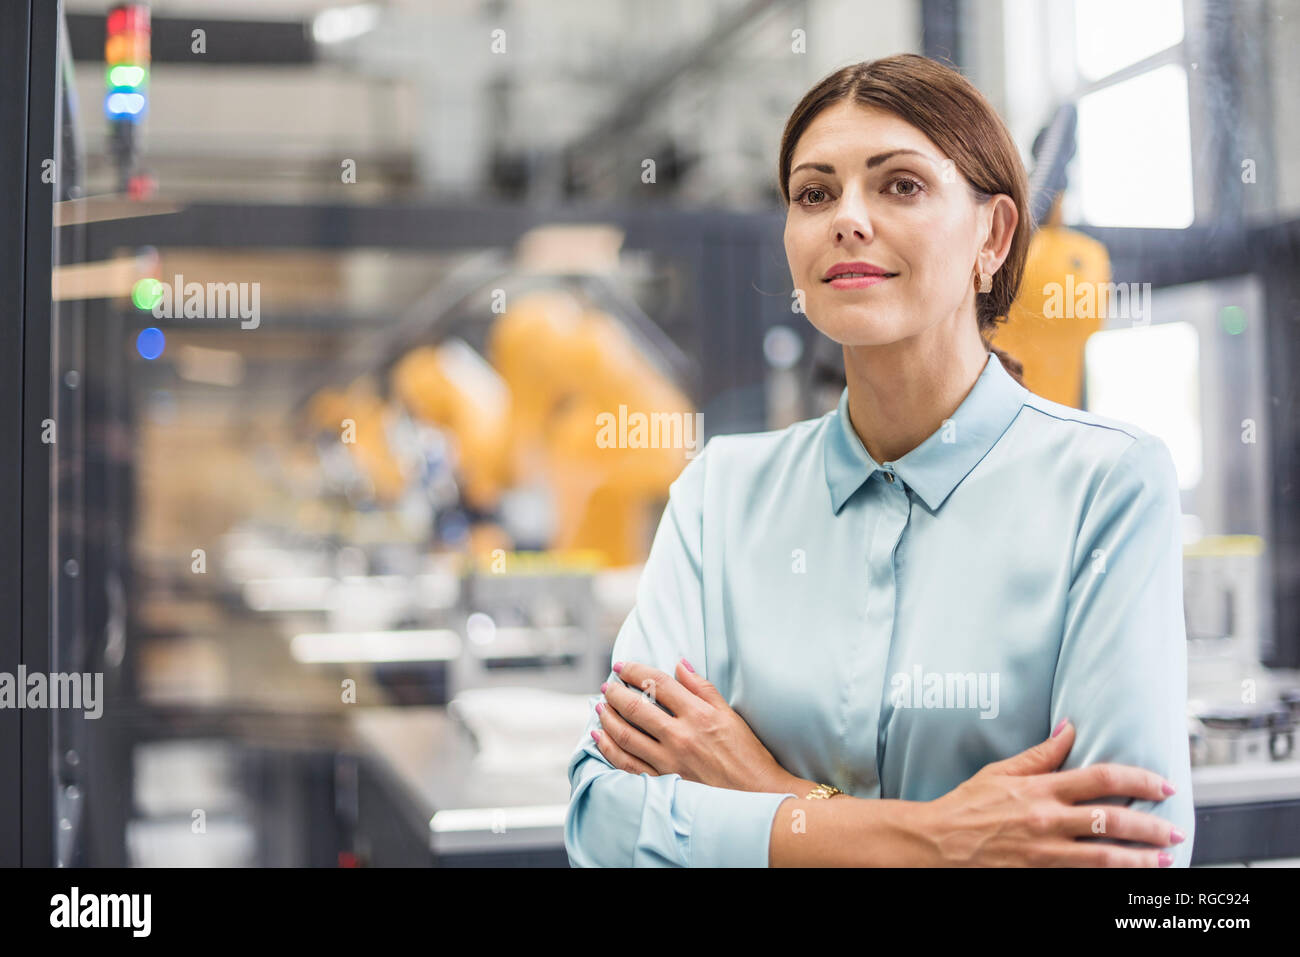 Businesswoman working in high tech company, portrait Stock Photo